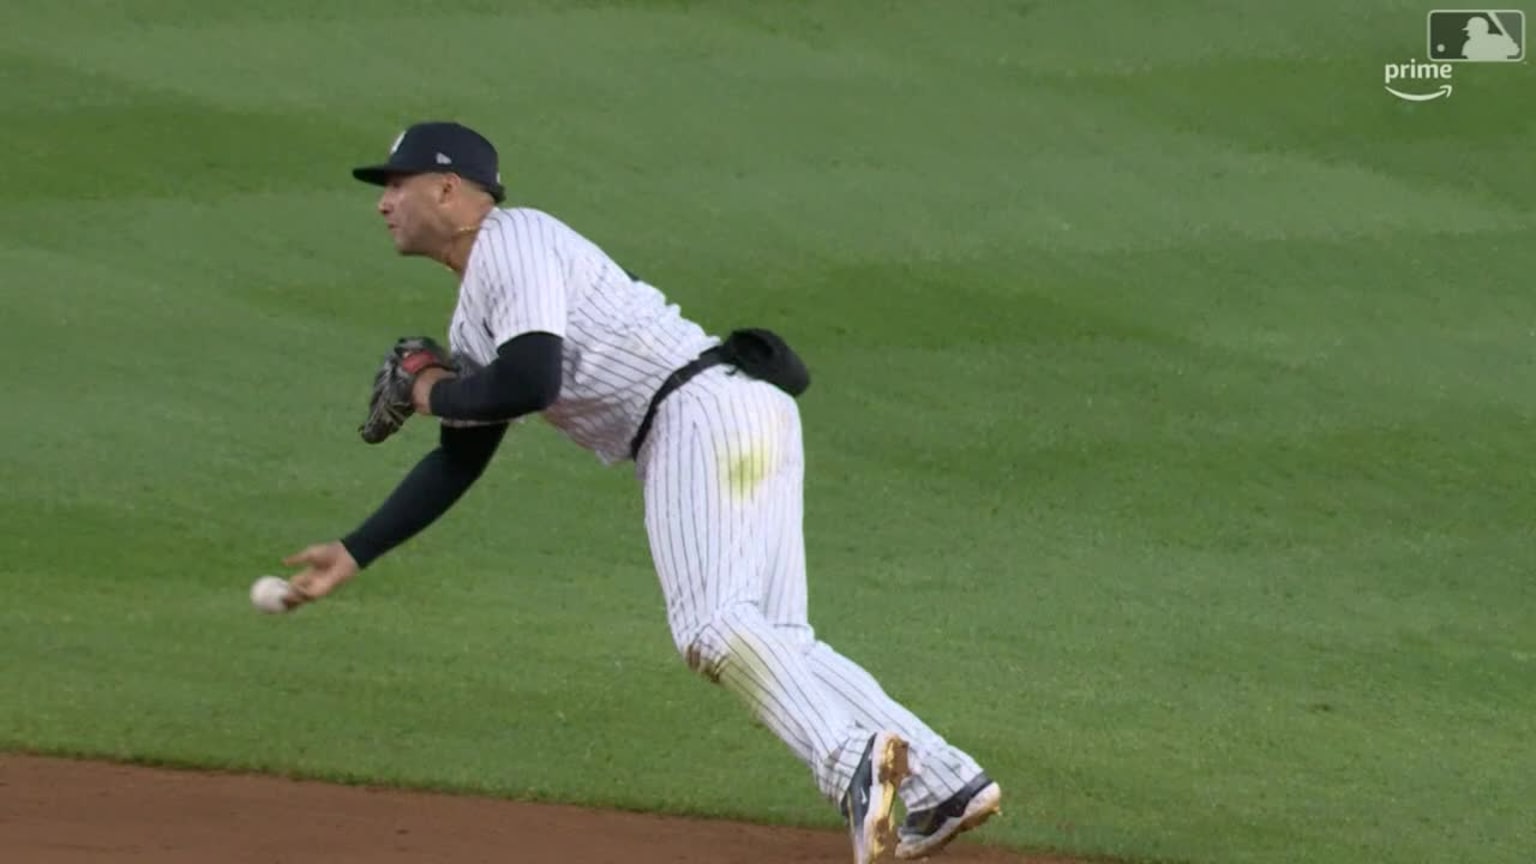 Derek Jeter of the New York Yankees turns a double play in the top